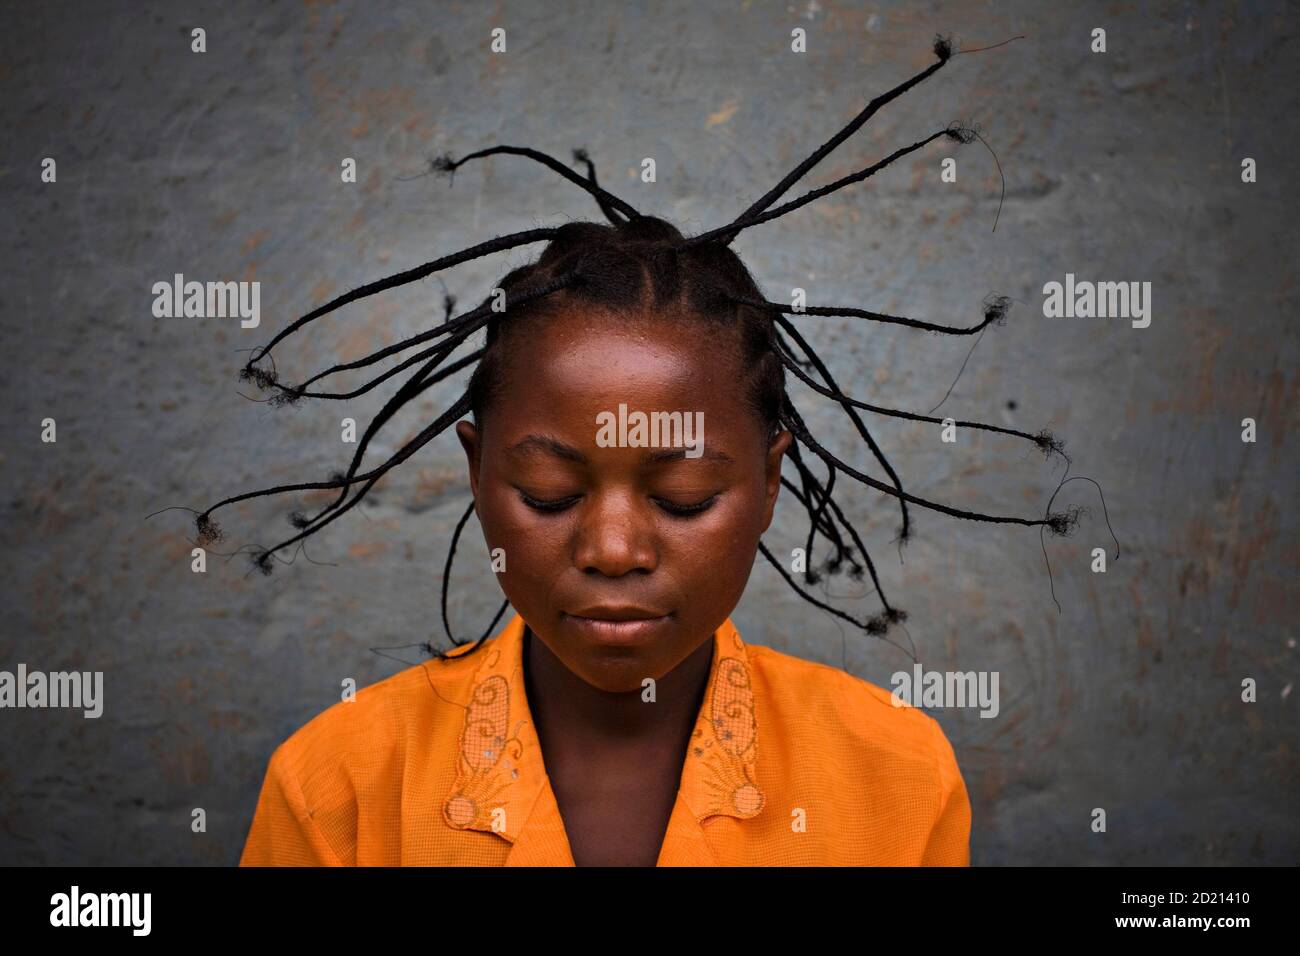 Serafin Nyanzaba, 17, who has been displaced by war, wears a newly done  traditional Congolese hair style at the Don Bosco center in Goma, in this  November 20, 2008 file photo. More